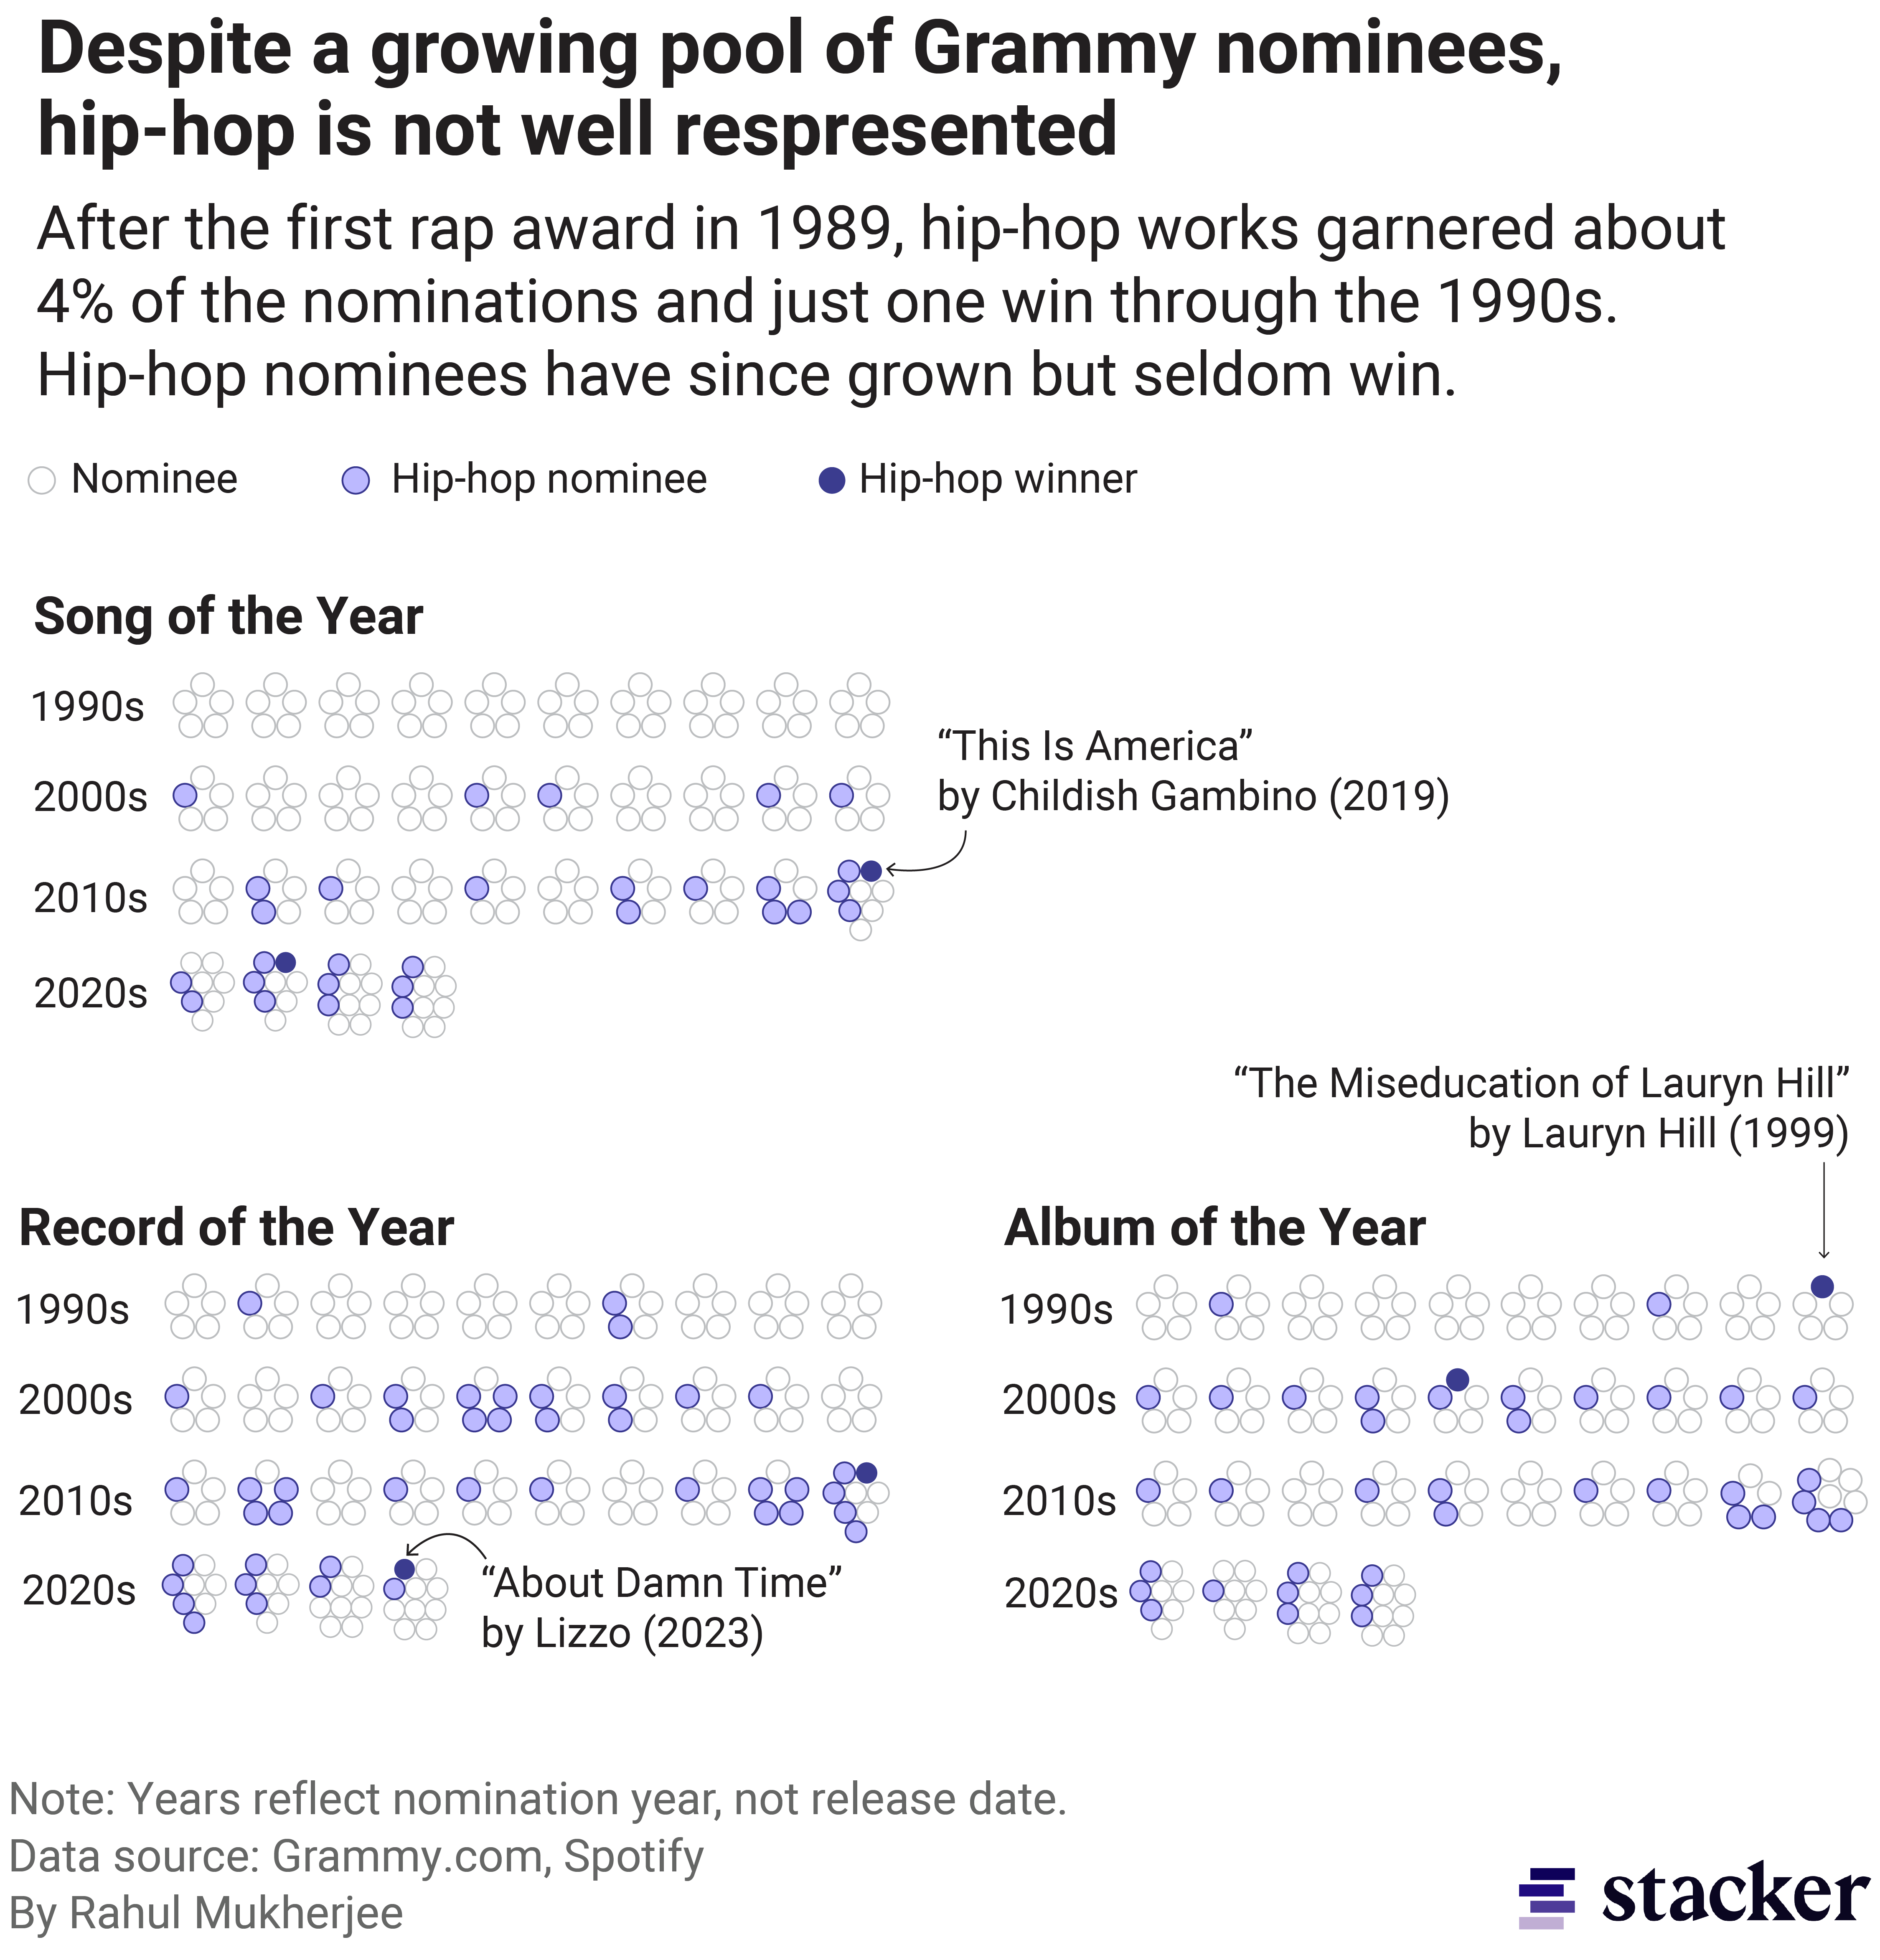 A bubble chart showing the numbers of hip hop nominees and winners by year. There have been long stretches of no nominees, with less than five winners.